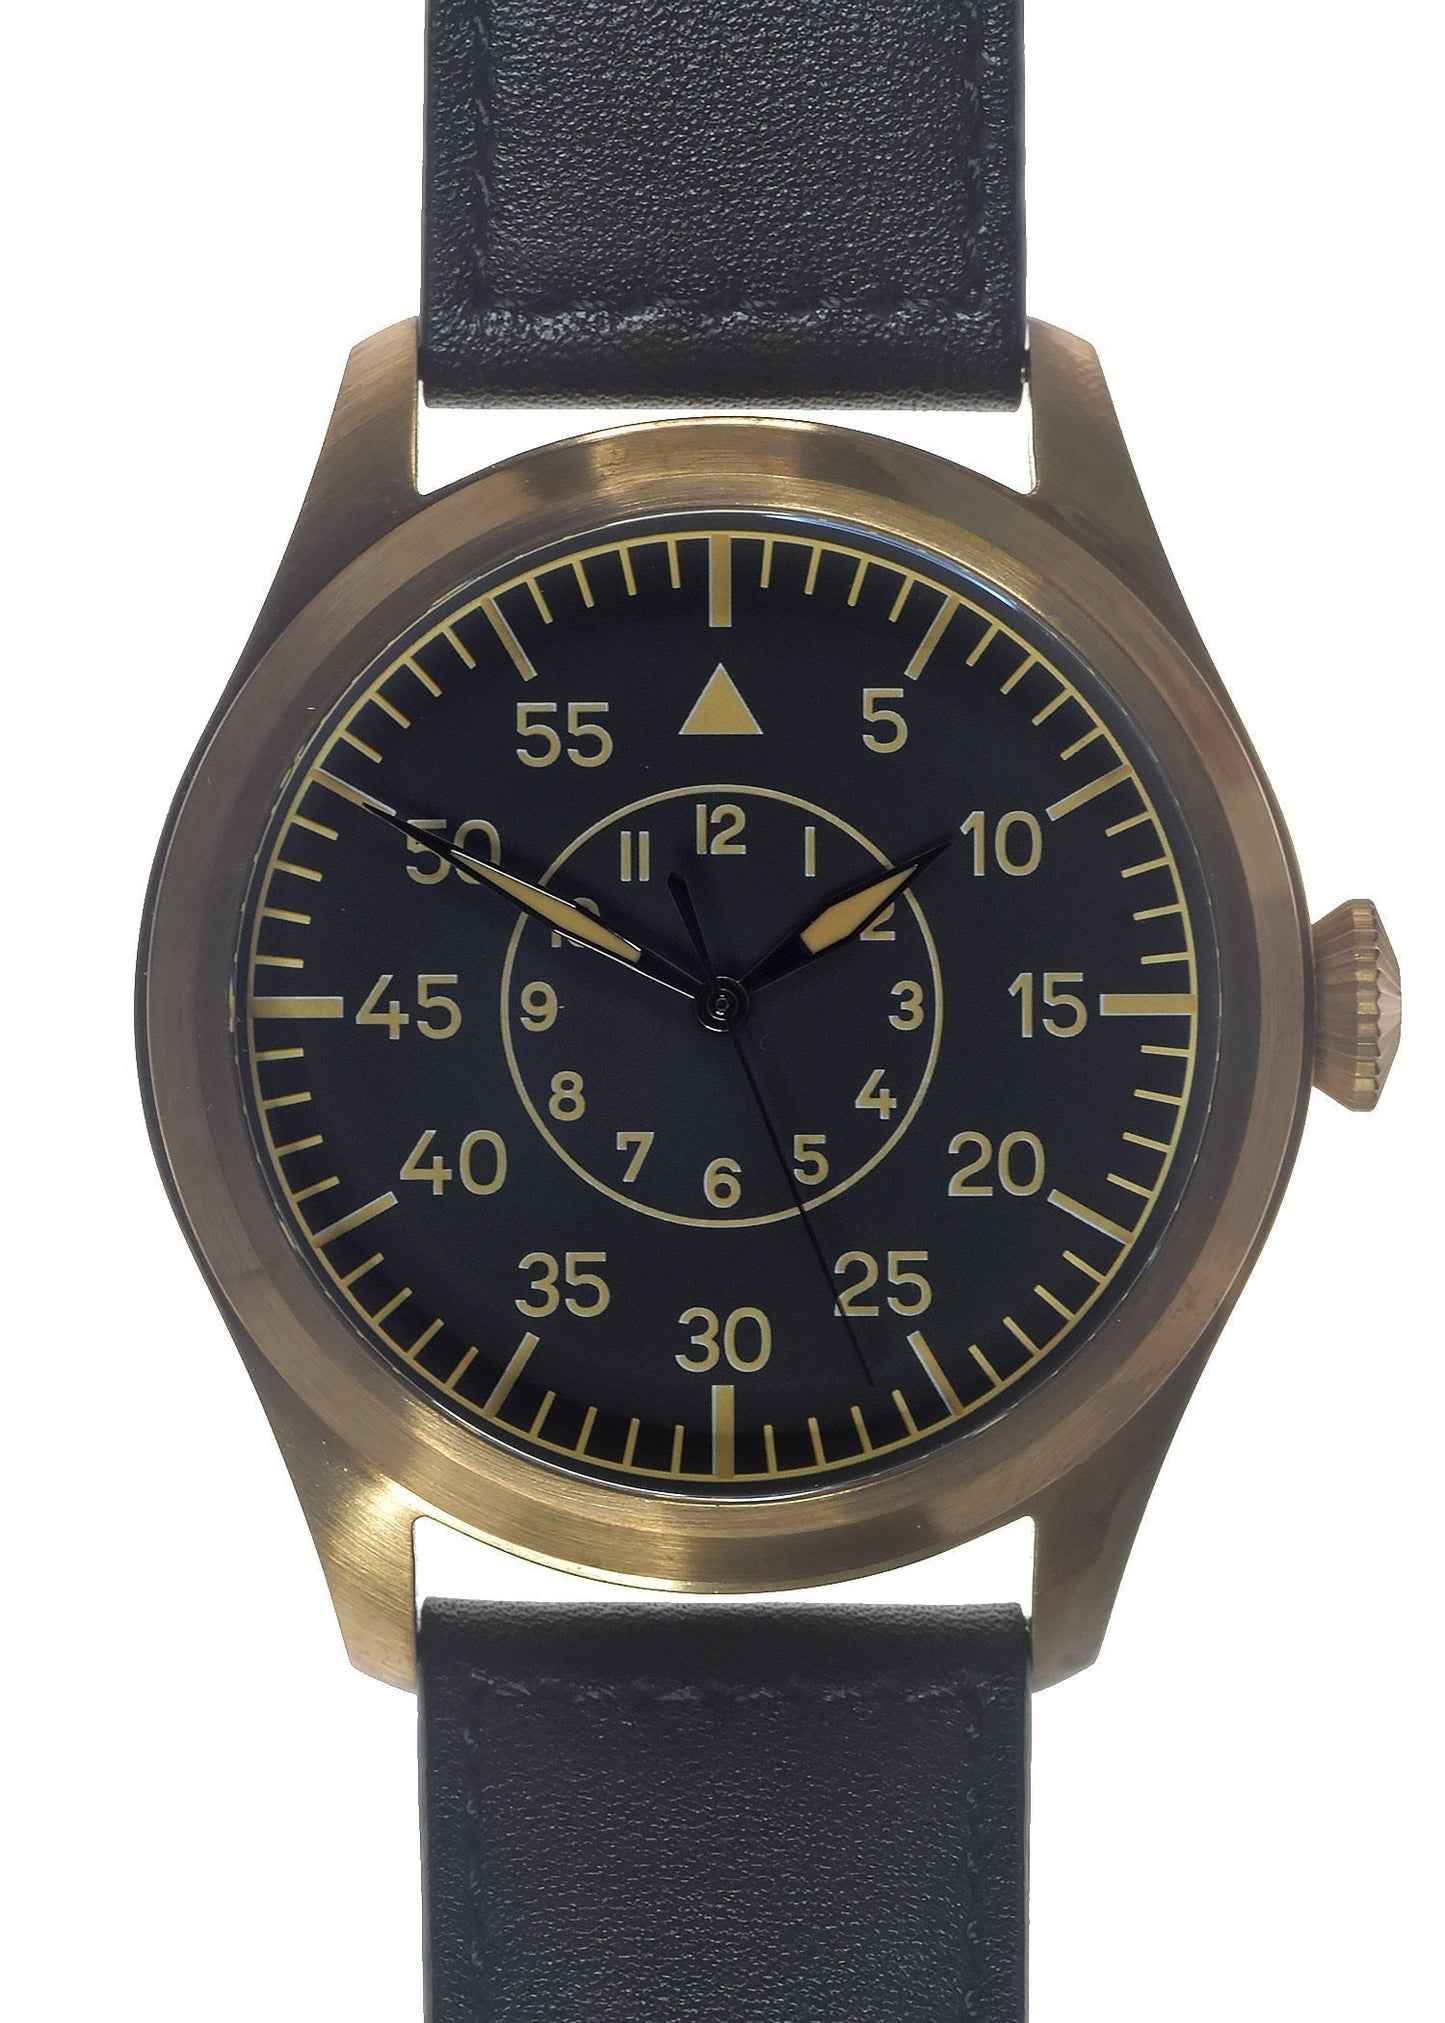 MWC Classic 46mm Limited Edition Bronze XL Luftwaffe Pattern Military Aviators Watch (Retro Dial Version)